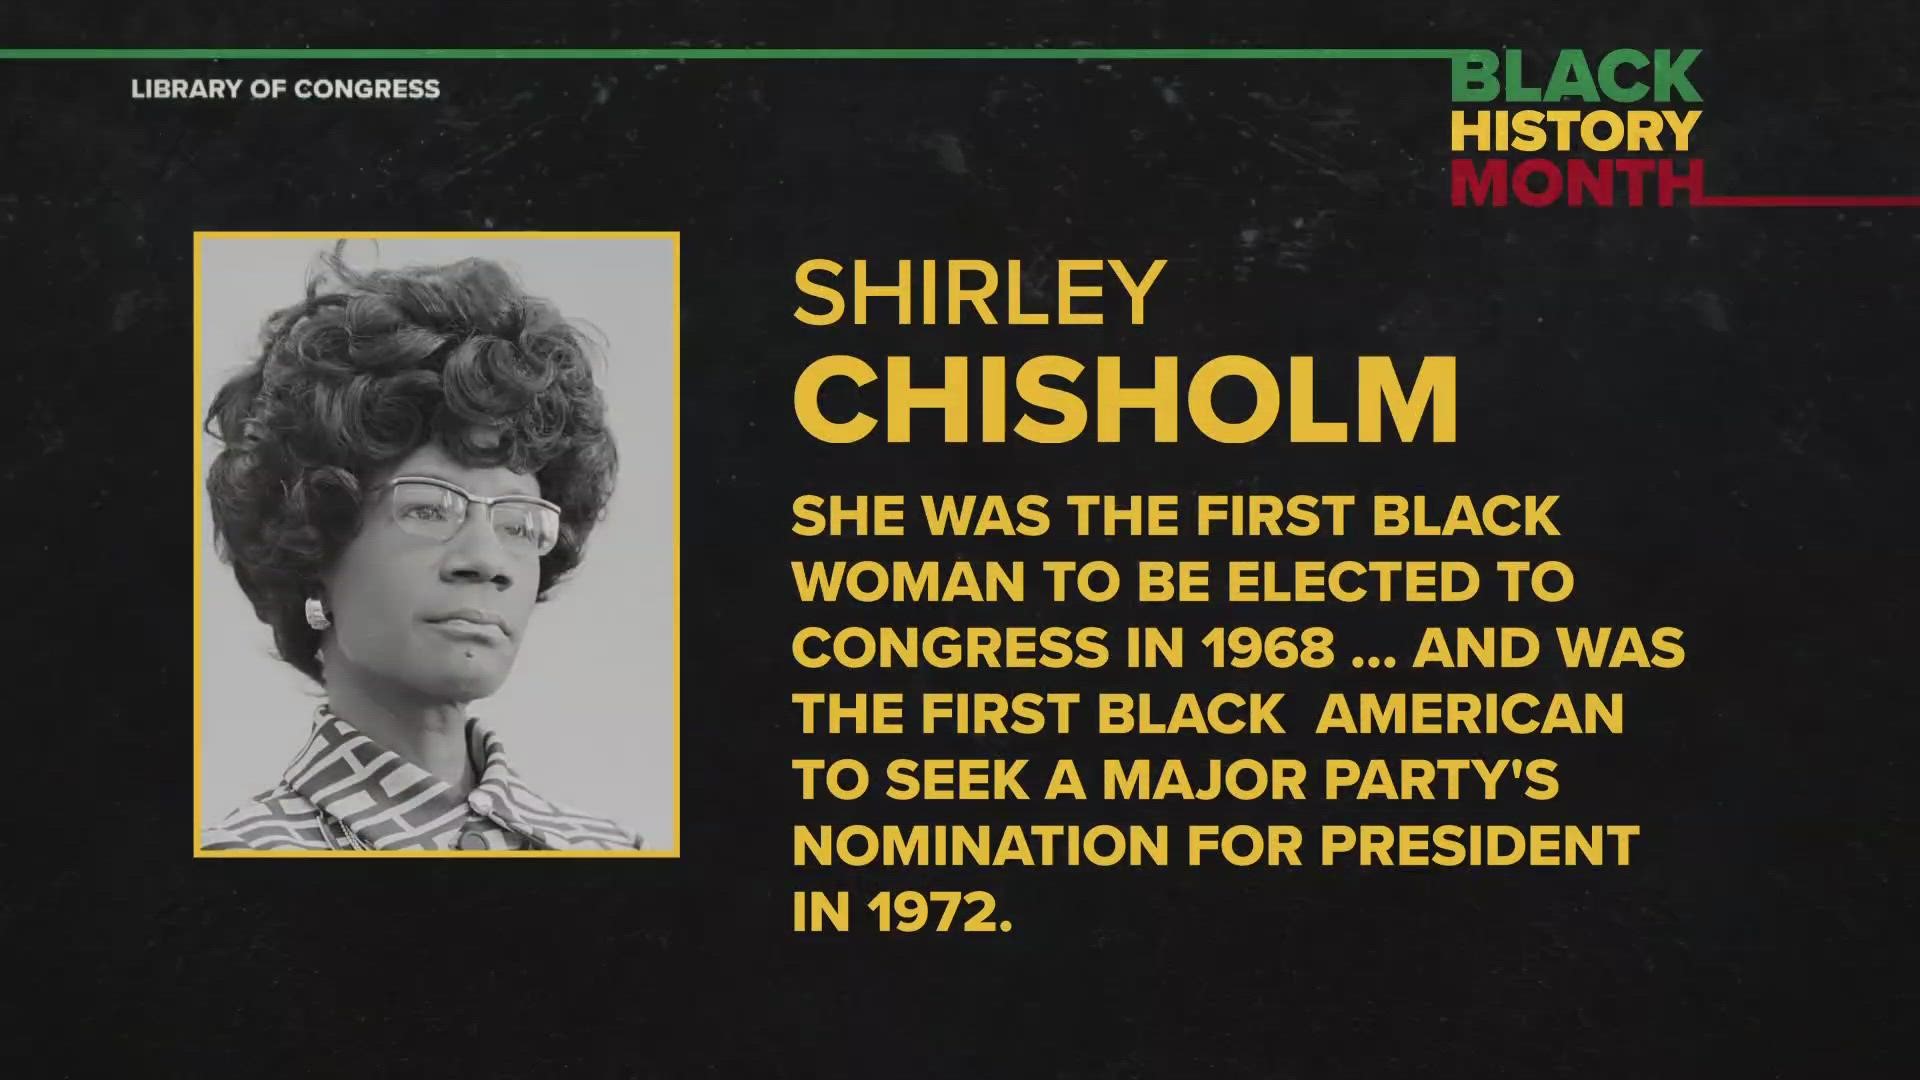 Shirley Chisholm of New York was the first Black woman elected to Congress and the first Black American to seek a major party's nomination for president.